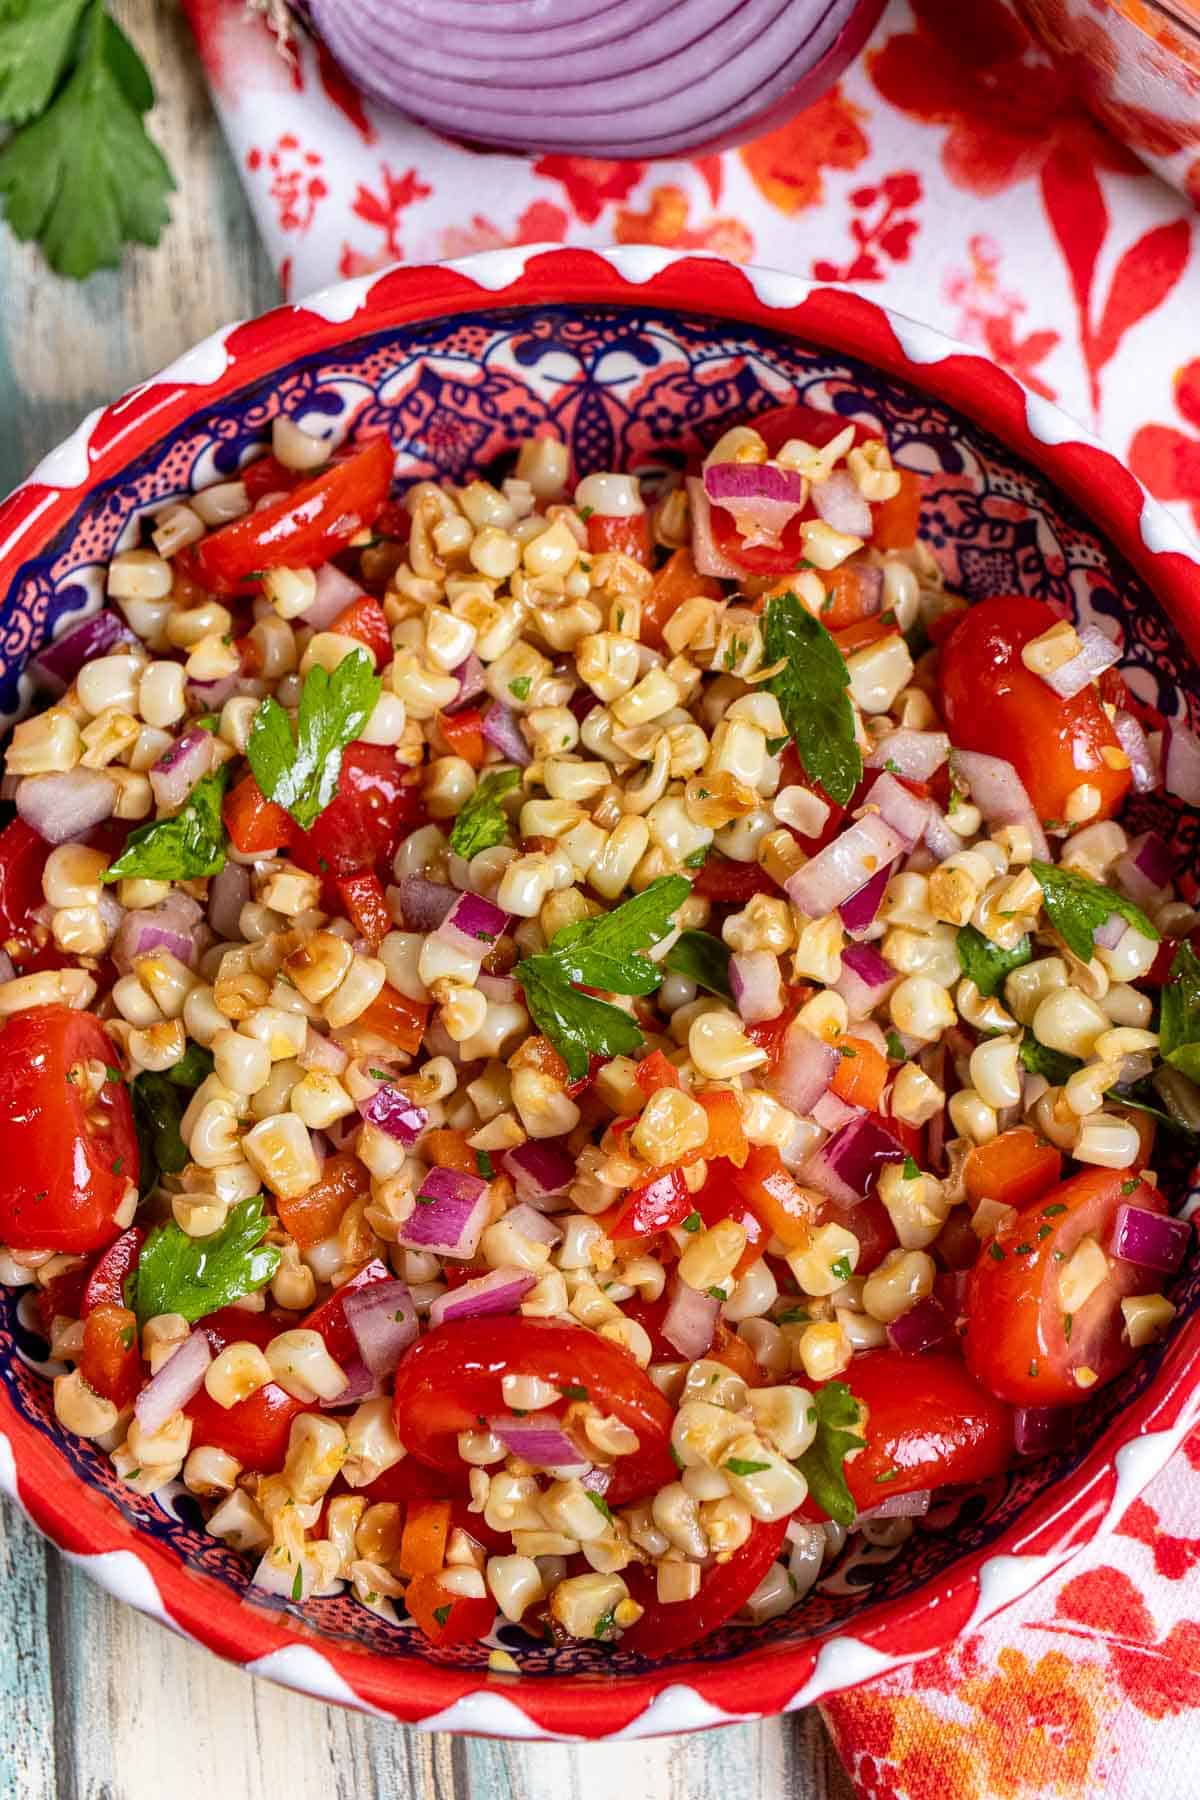 Close up view of grilled corn salad in a red and white bowl with half a red onion and parsley behind it.